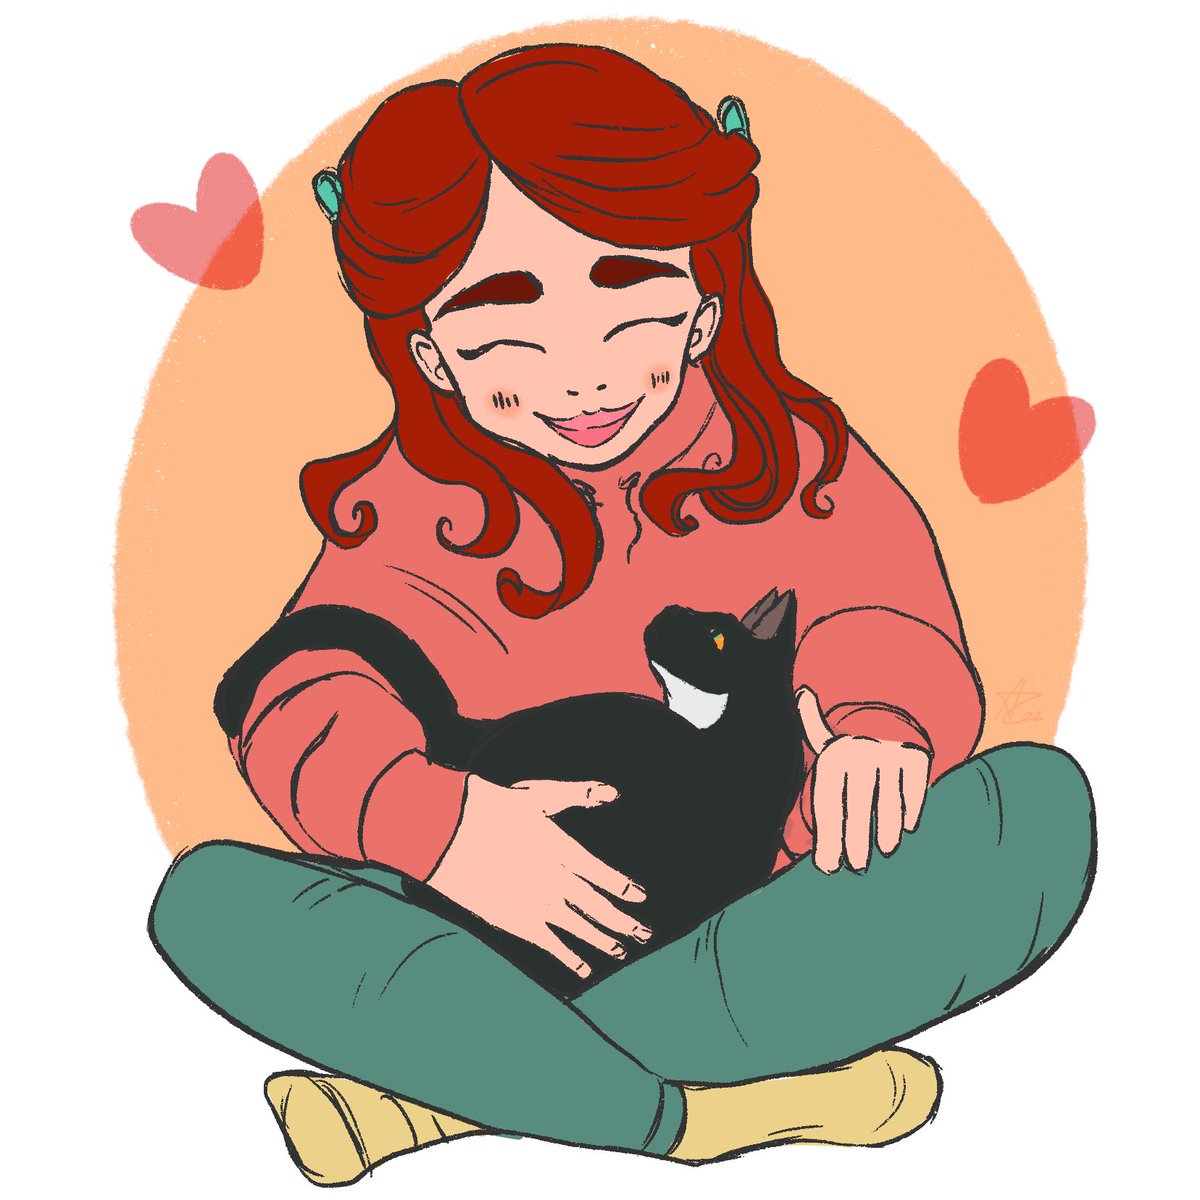 Day 31 of #calmtober
Friend 🥰
Just me and my cat Luna, she's been sitting on me a lot more so it's adorable and cosy.
#alicecheethamart #meowkitty17art #catfriend #digitalart #procreateart #redhair #cozyart #Samhain #CatsOfTwitter #softtones #cuteart #inktober2022